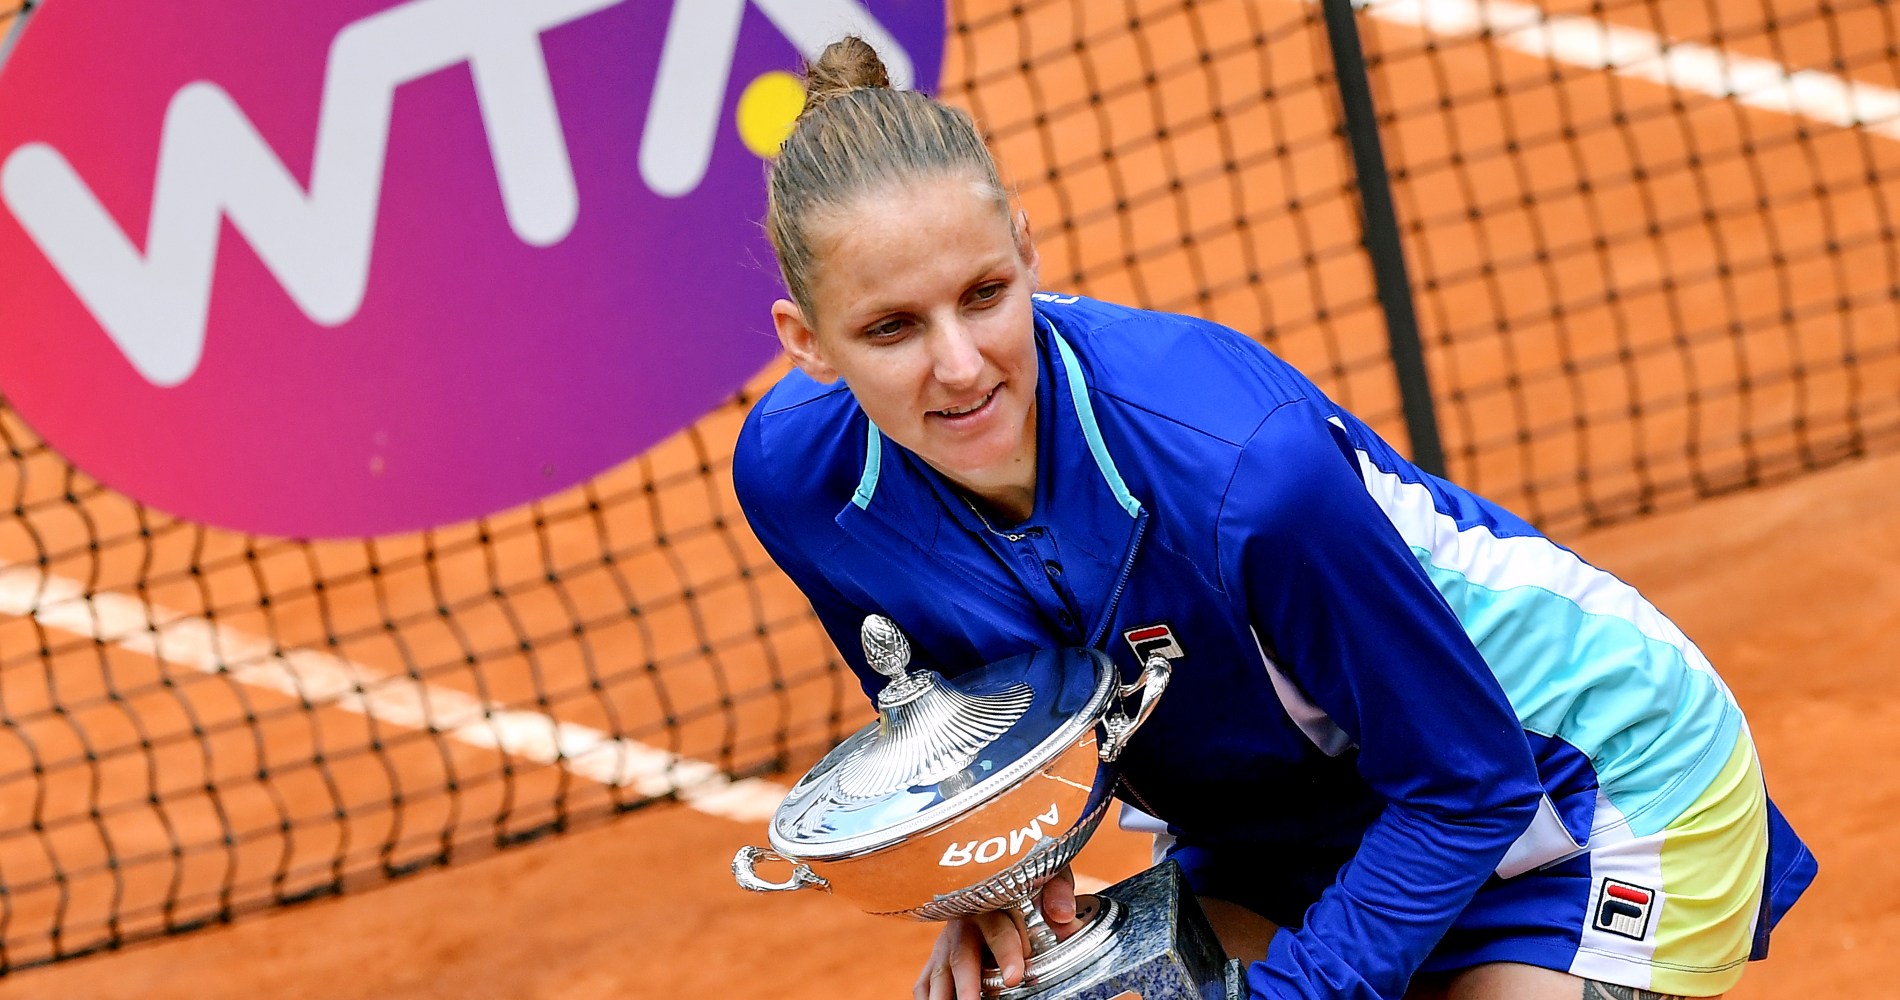 Rome Masters 1000 / WTA Premier : 10 questions you may ask